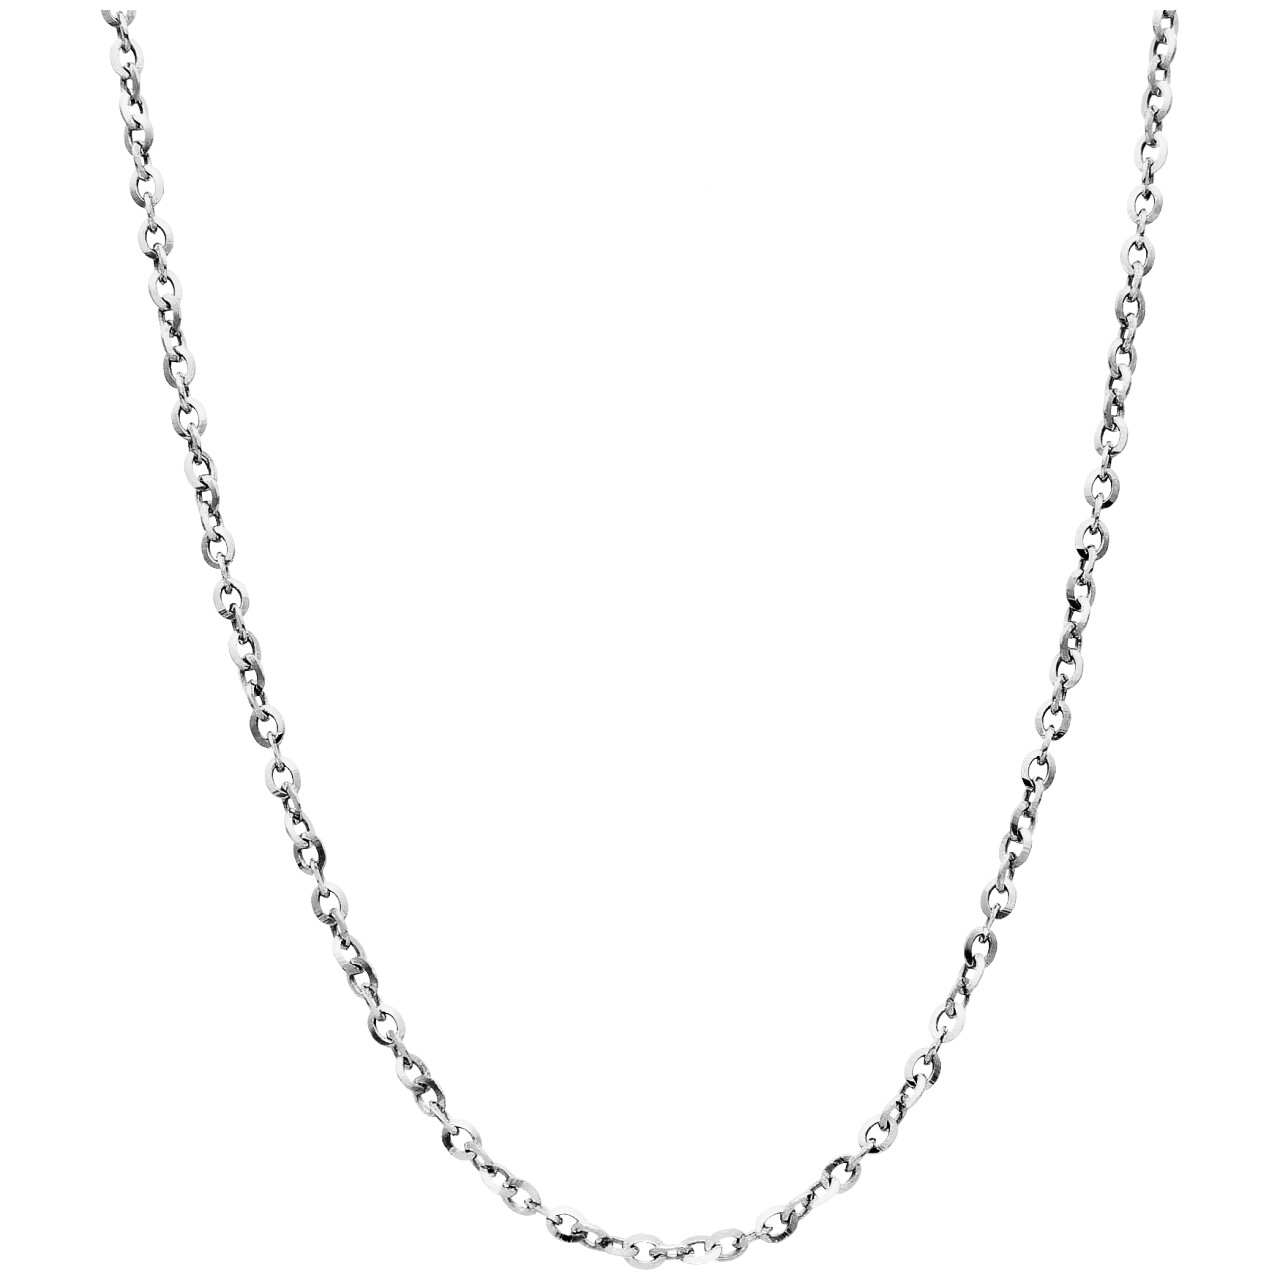 Groumette white gold necklace